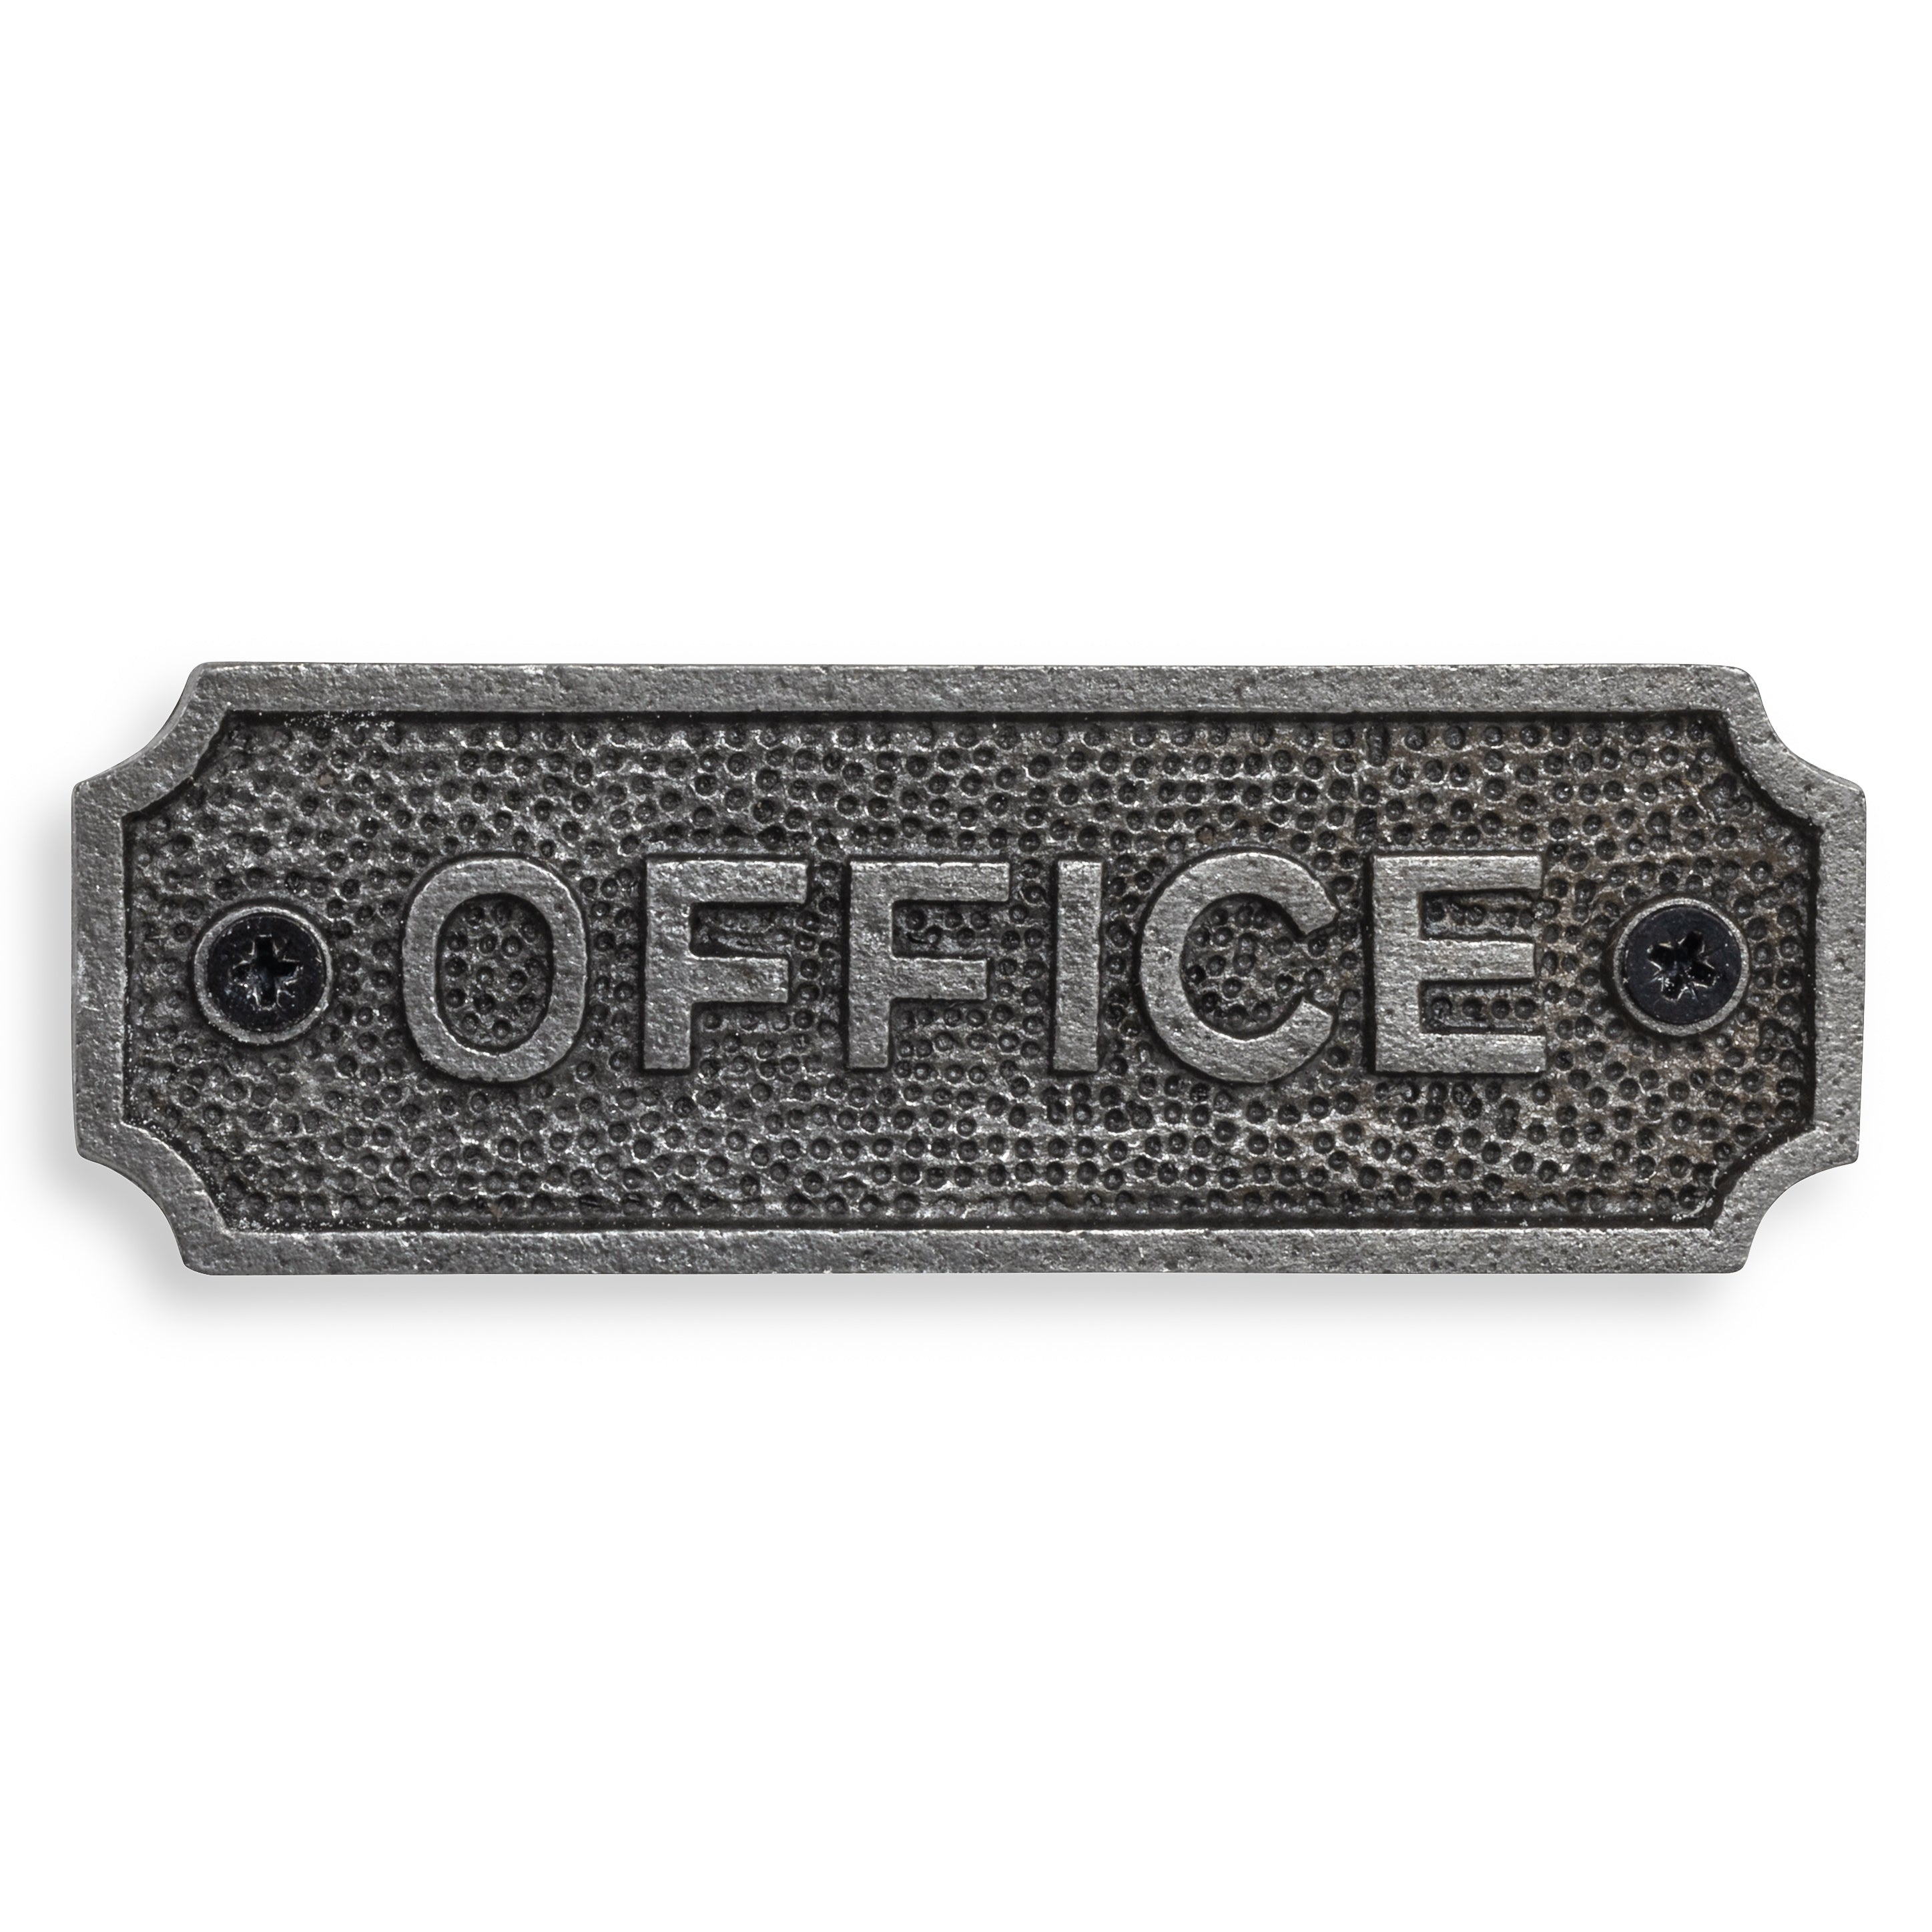 Office Door Sign - Outlet - Save 20%